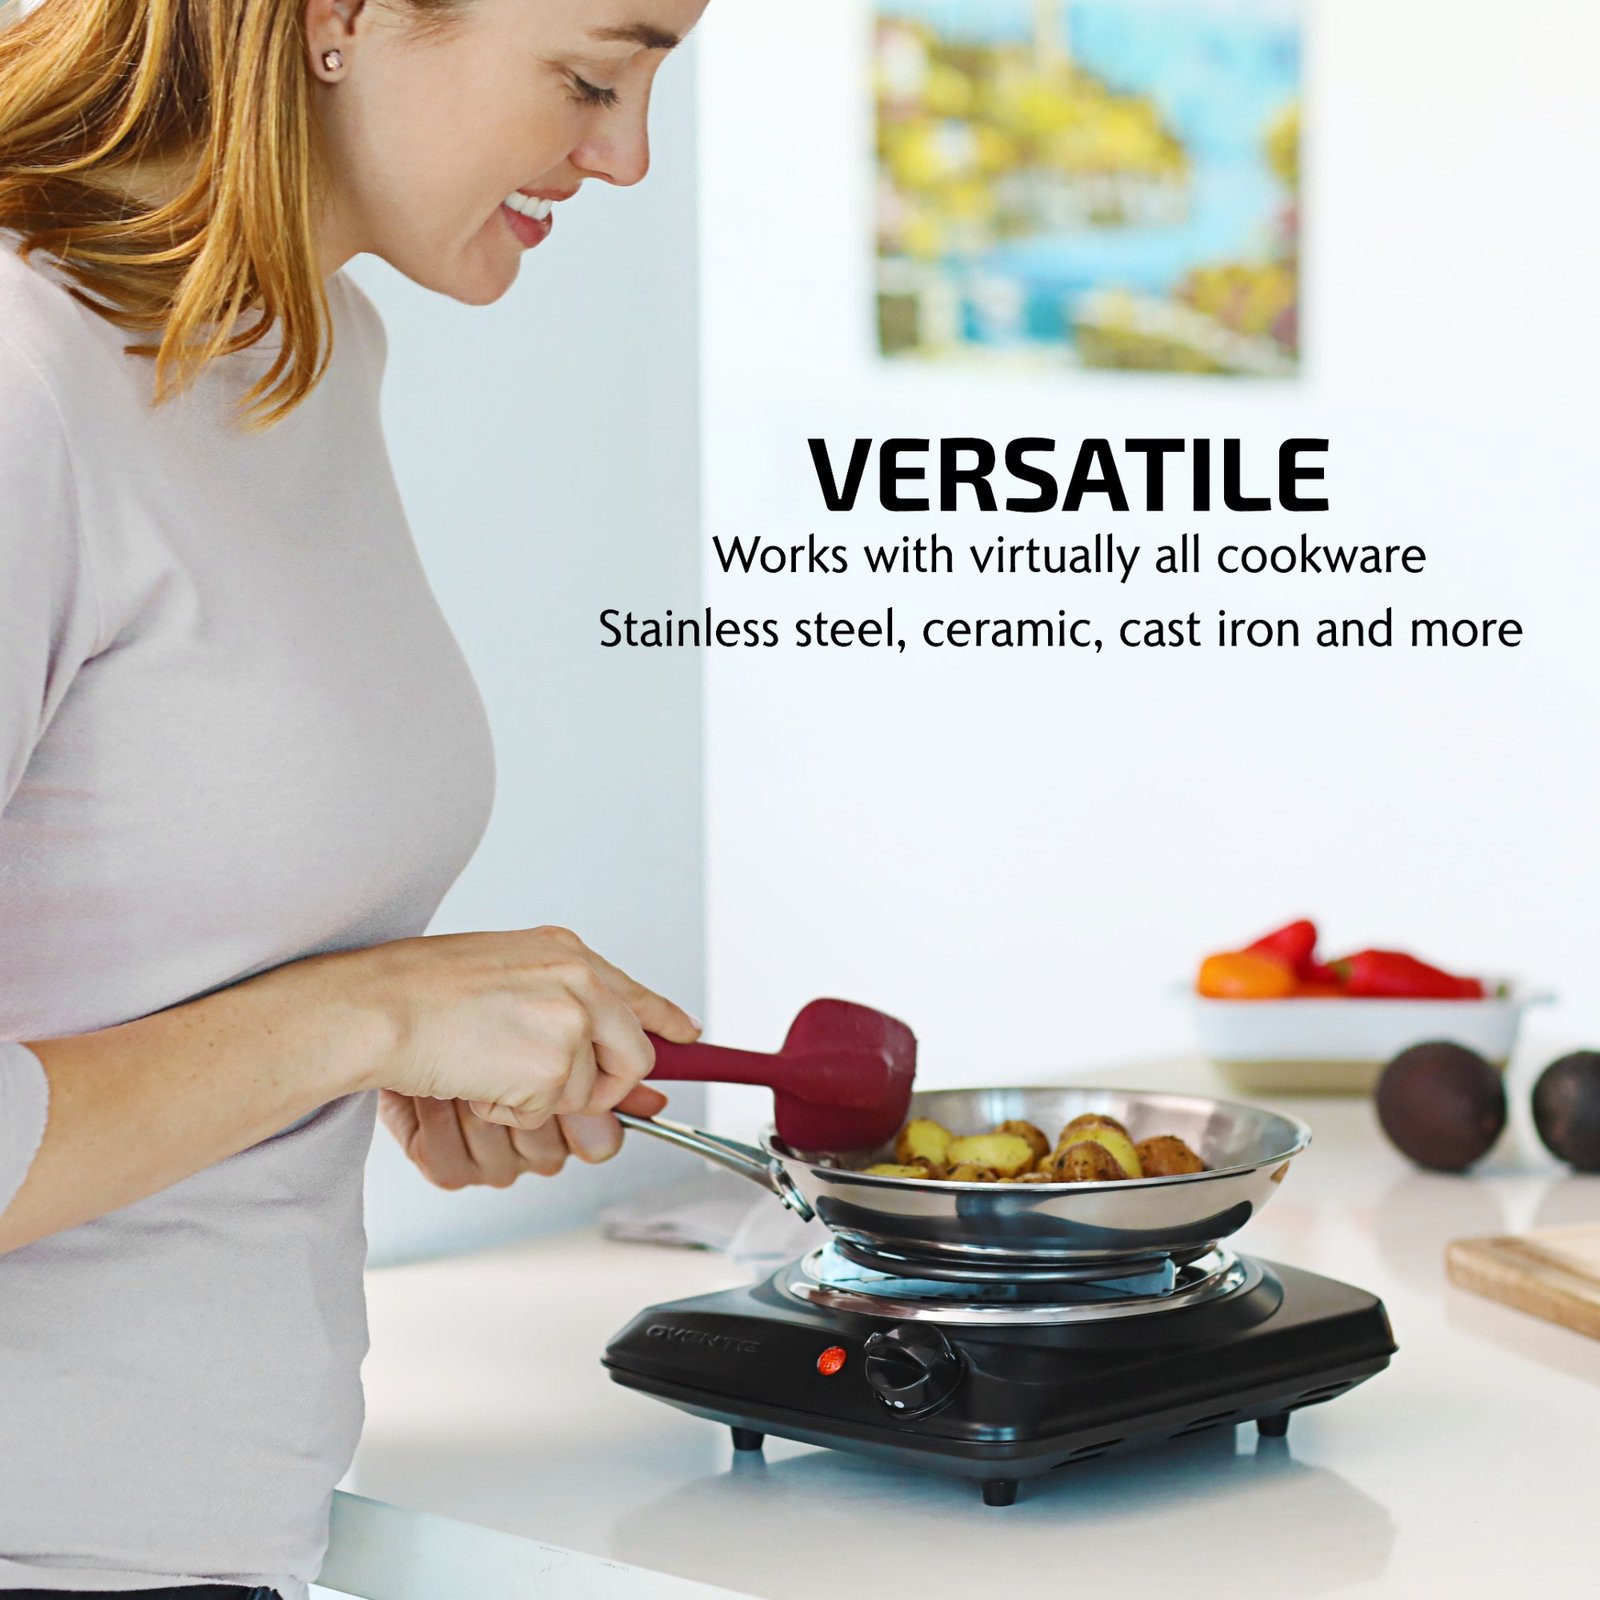 Buy Online New Hot Plates Portable Electric Burner 1000W Single Stove Mini  Hotplate Adjustable Temperature Cooker Coffee Tea Kitchen at